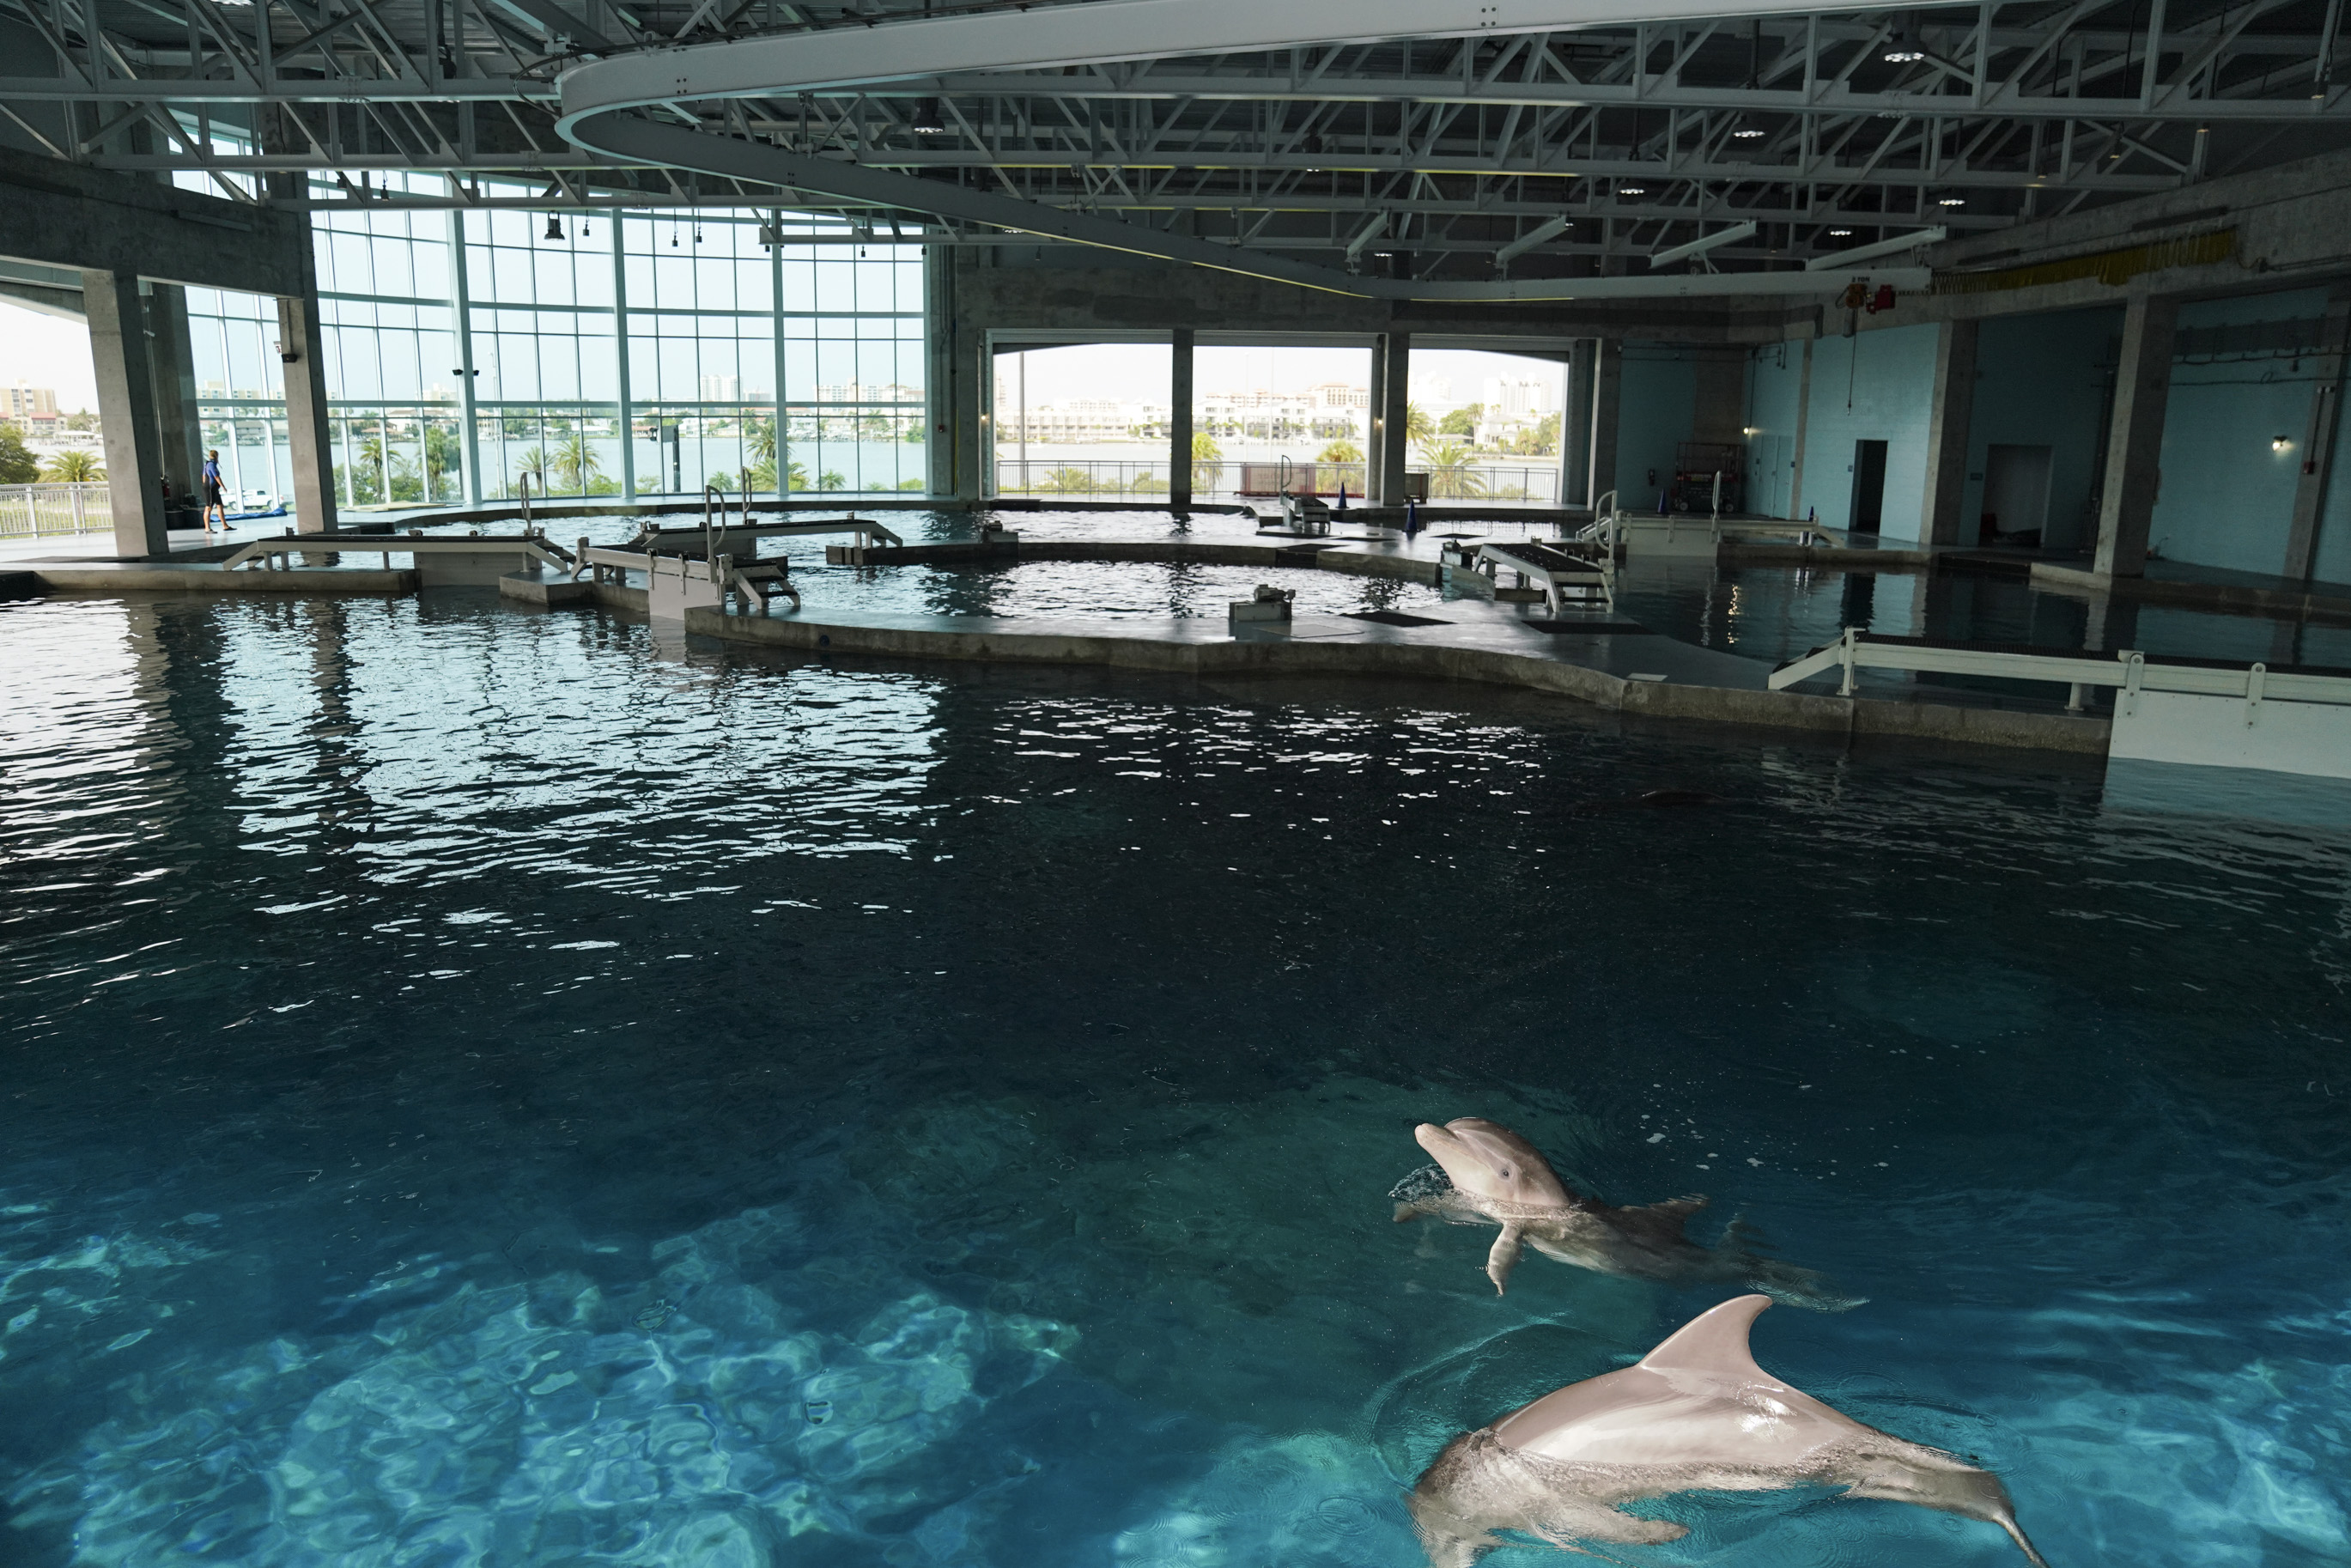 Video of workers changing clothes leads Clearwater aquarium to investigate